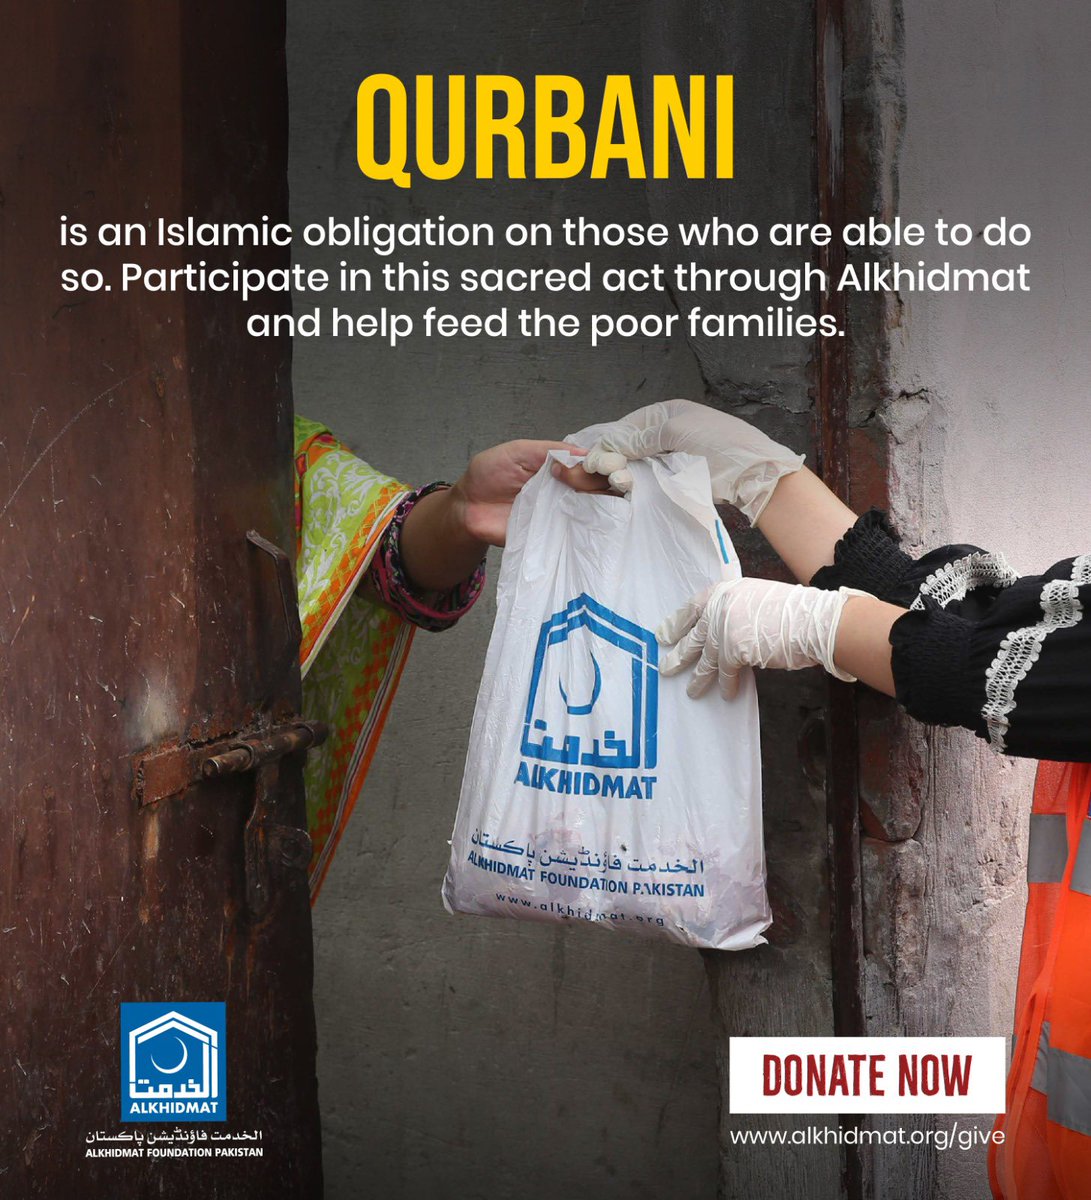 EidulAzha is all about sacrifice and spreading love. Come forward, donate for the needy and poor and share your happiness this eid so everyone can enjoy eid festivities.
Donate Now: alkhidmat.org/qurbani #AlkhidmatQurbaniAppeal